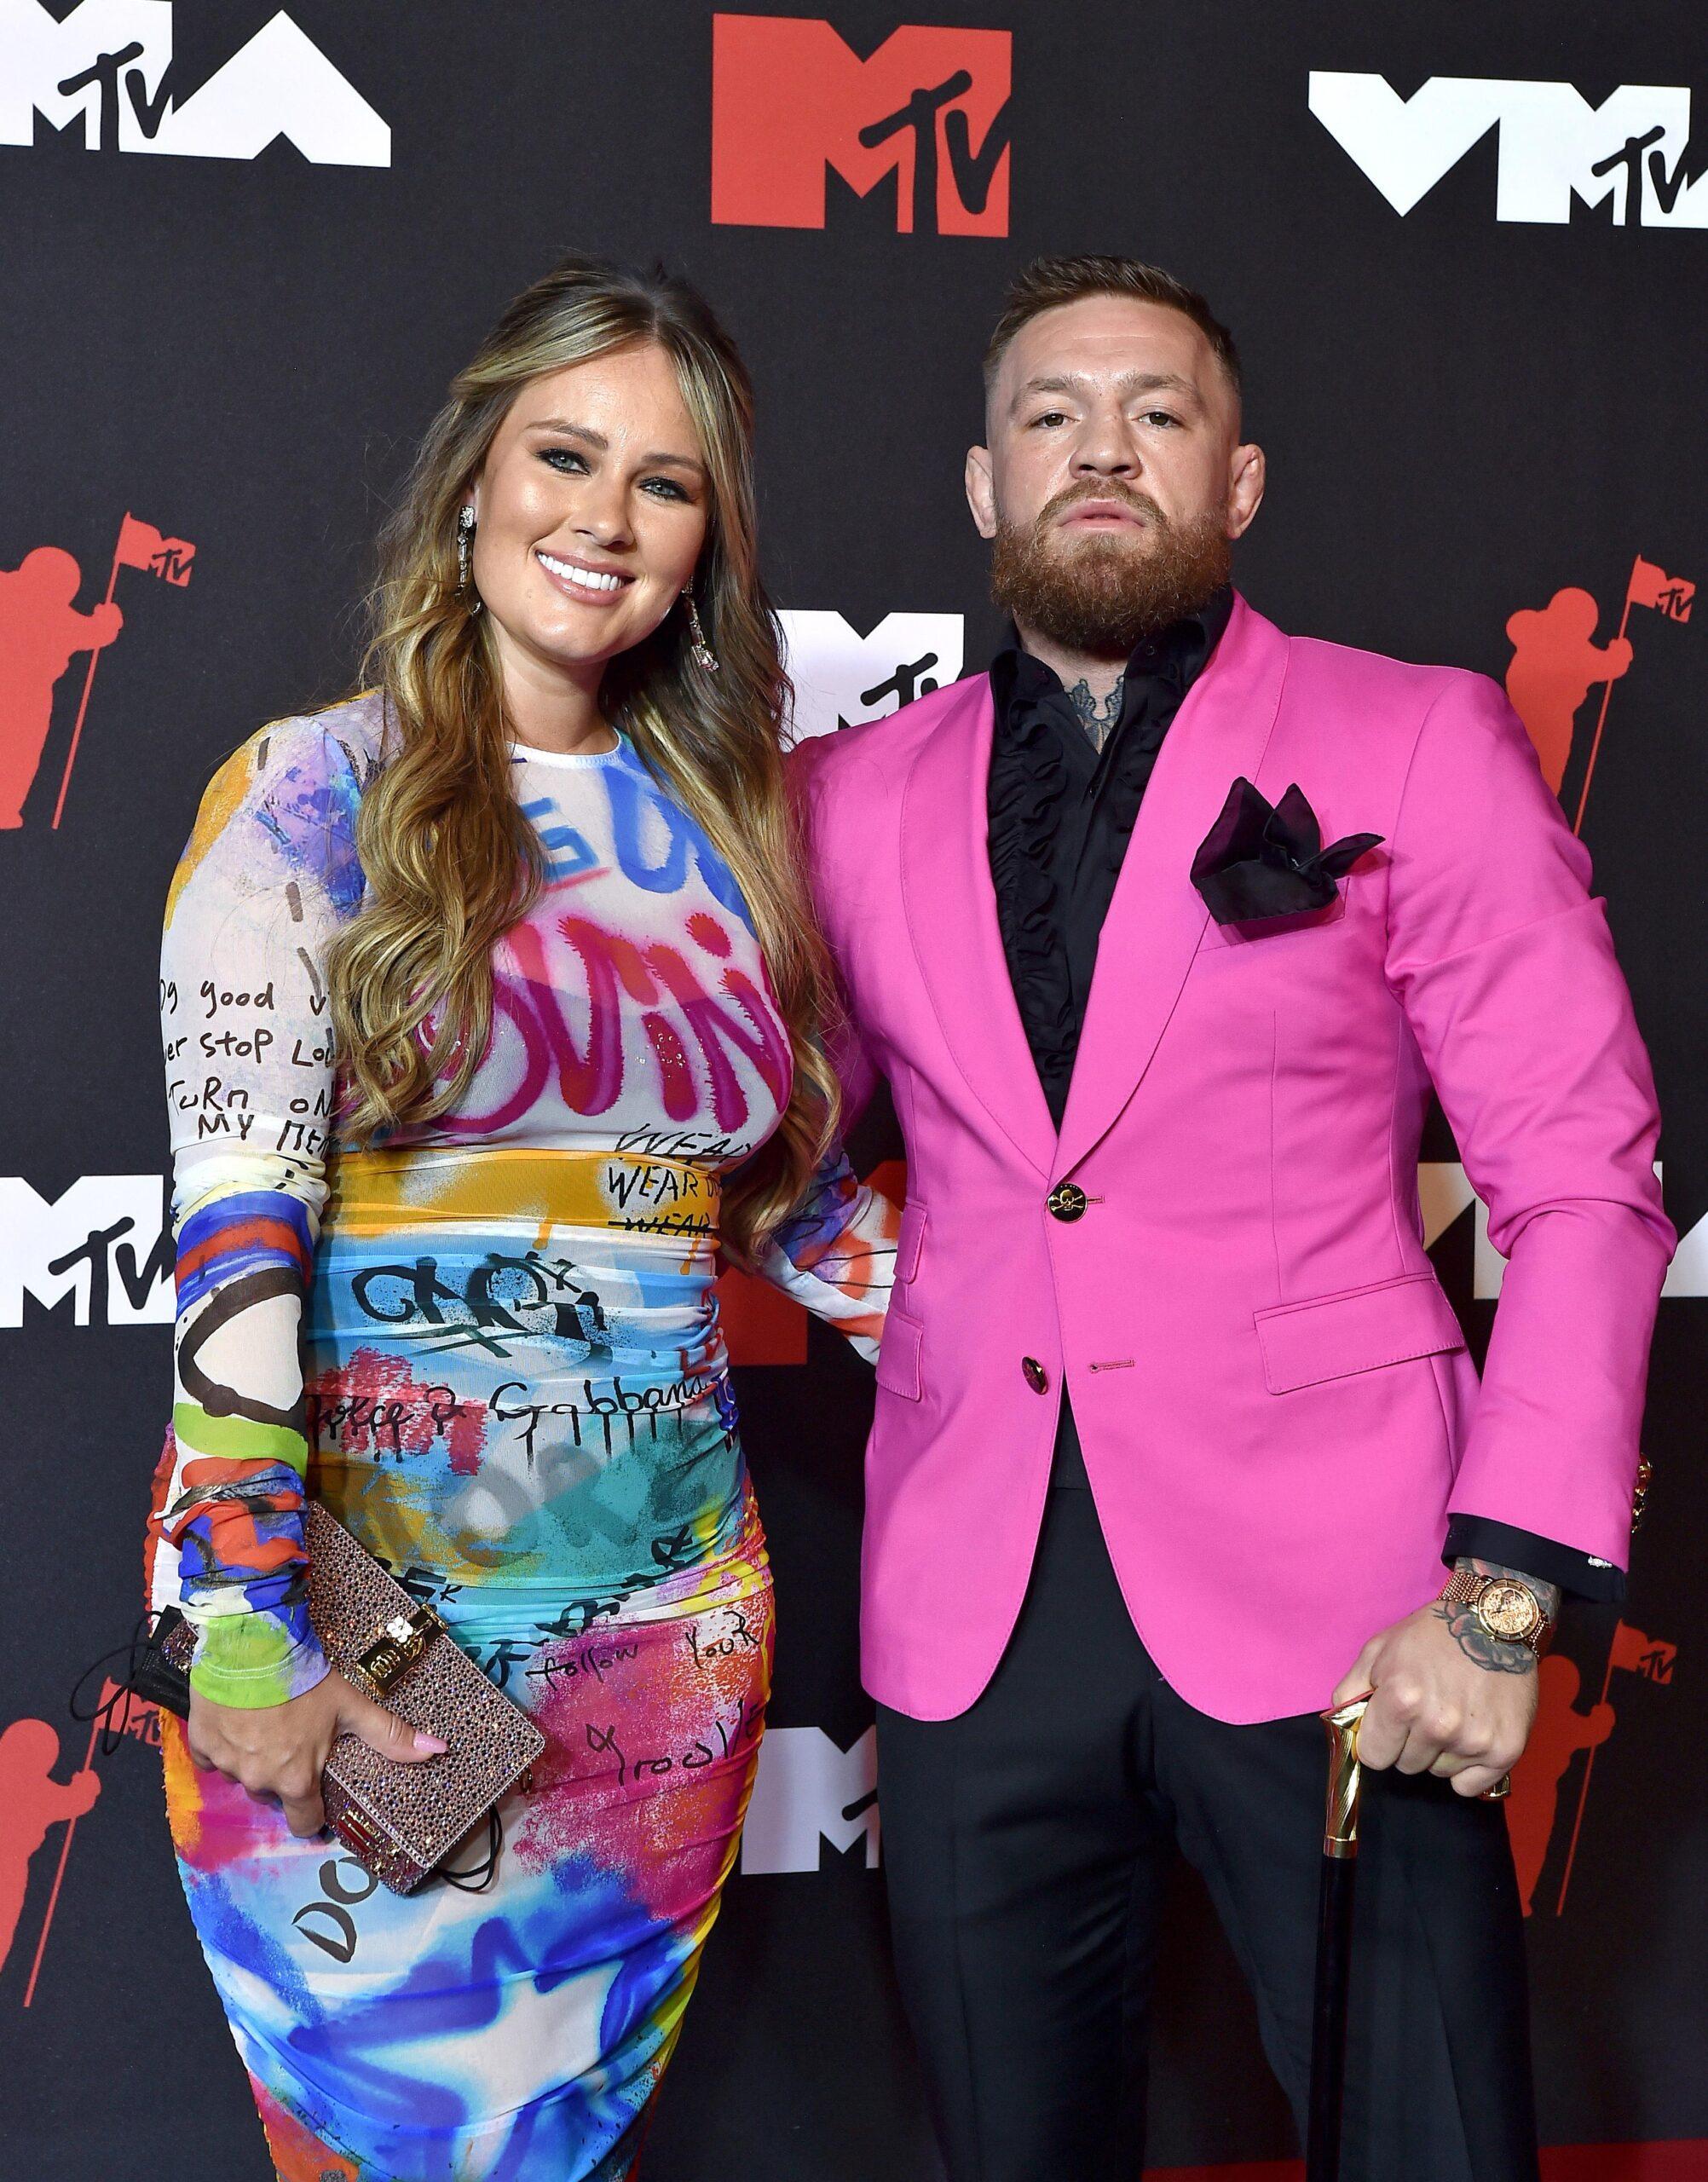 Conor McGregor and Dee Devlin at the 2021 MTV Video Music Awards